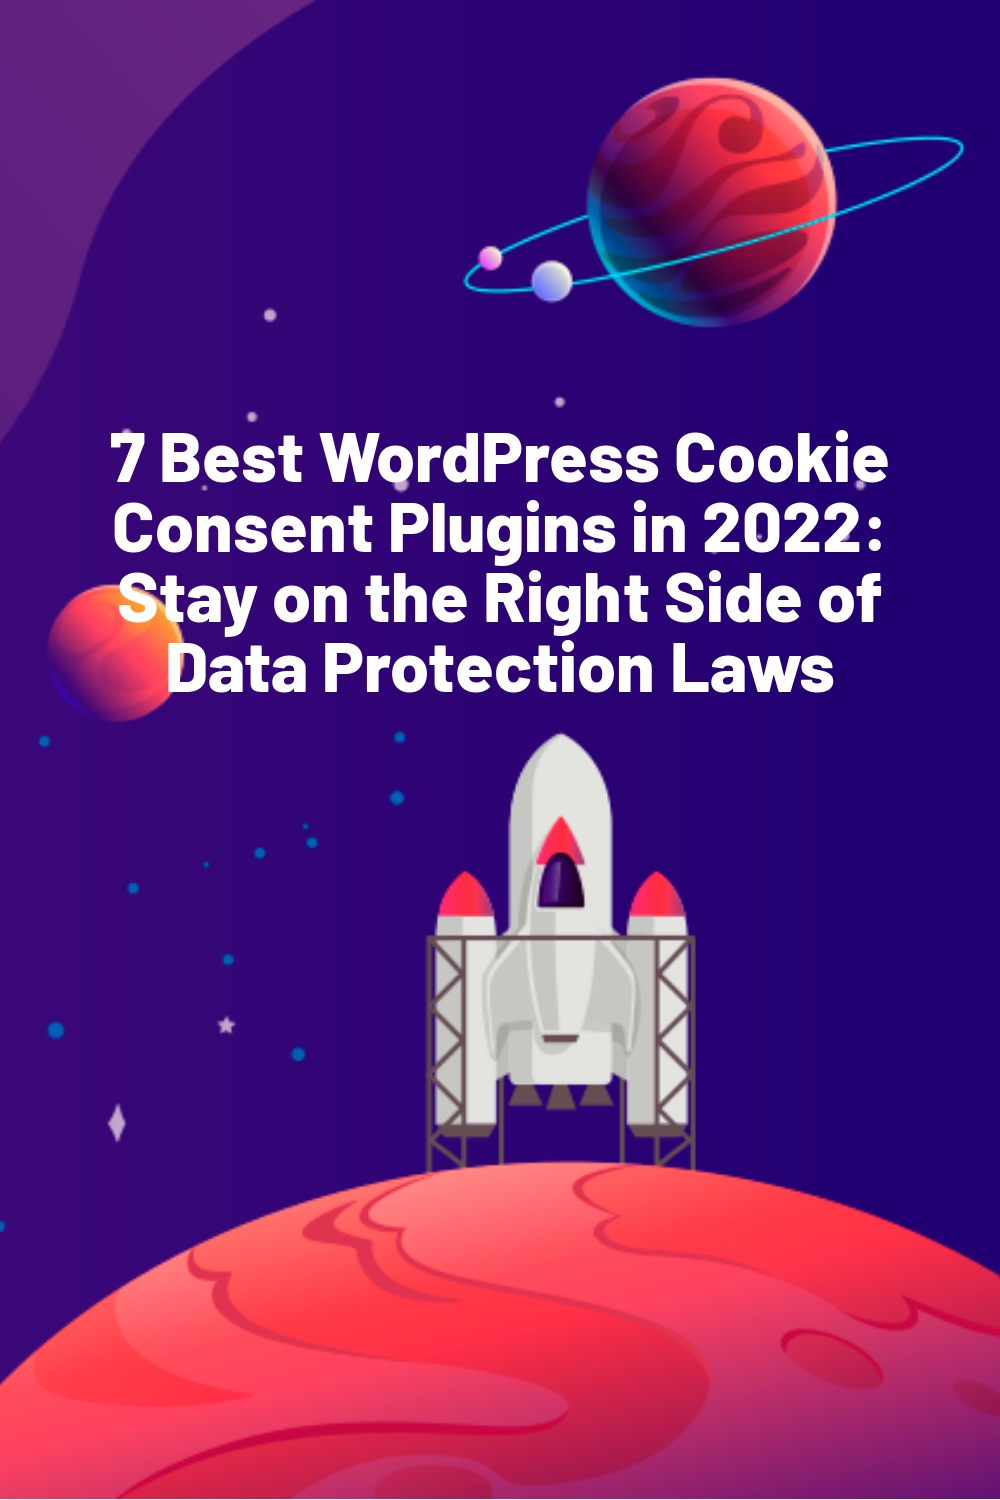 7 Best WordPress Cookie Consent Plugins in 2022: Stay on the Right Side of Data Protection Laws